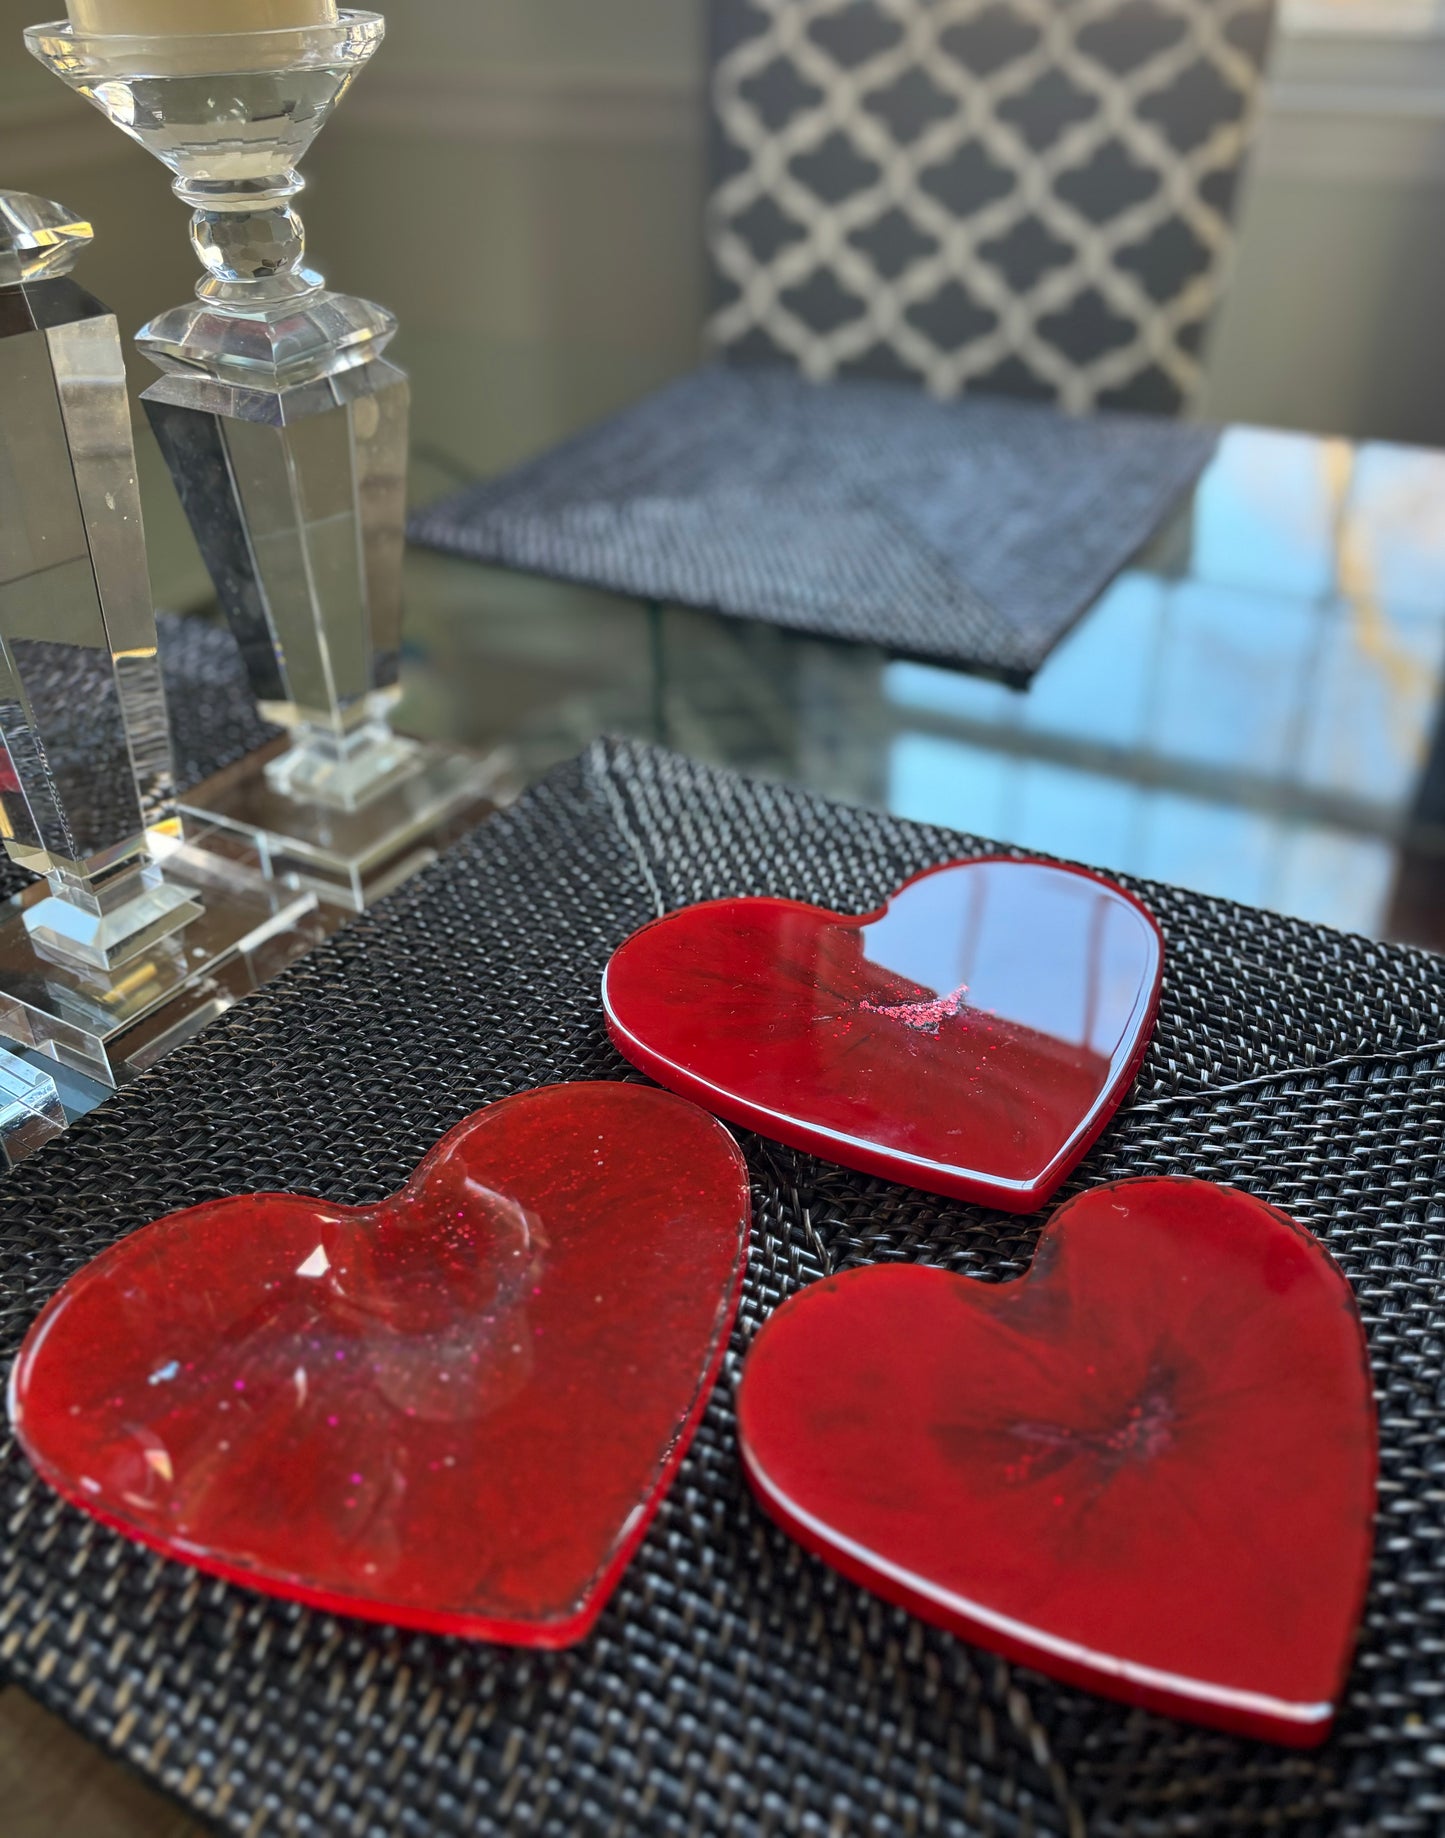 7in. resin heArt hot plate